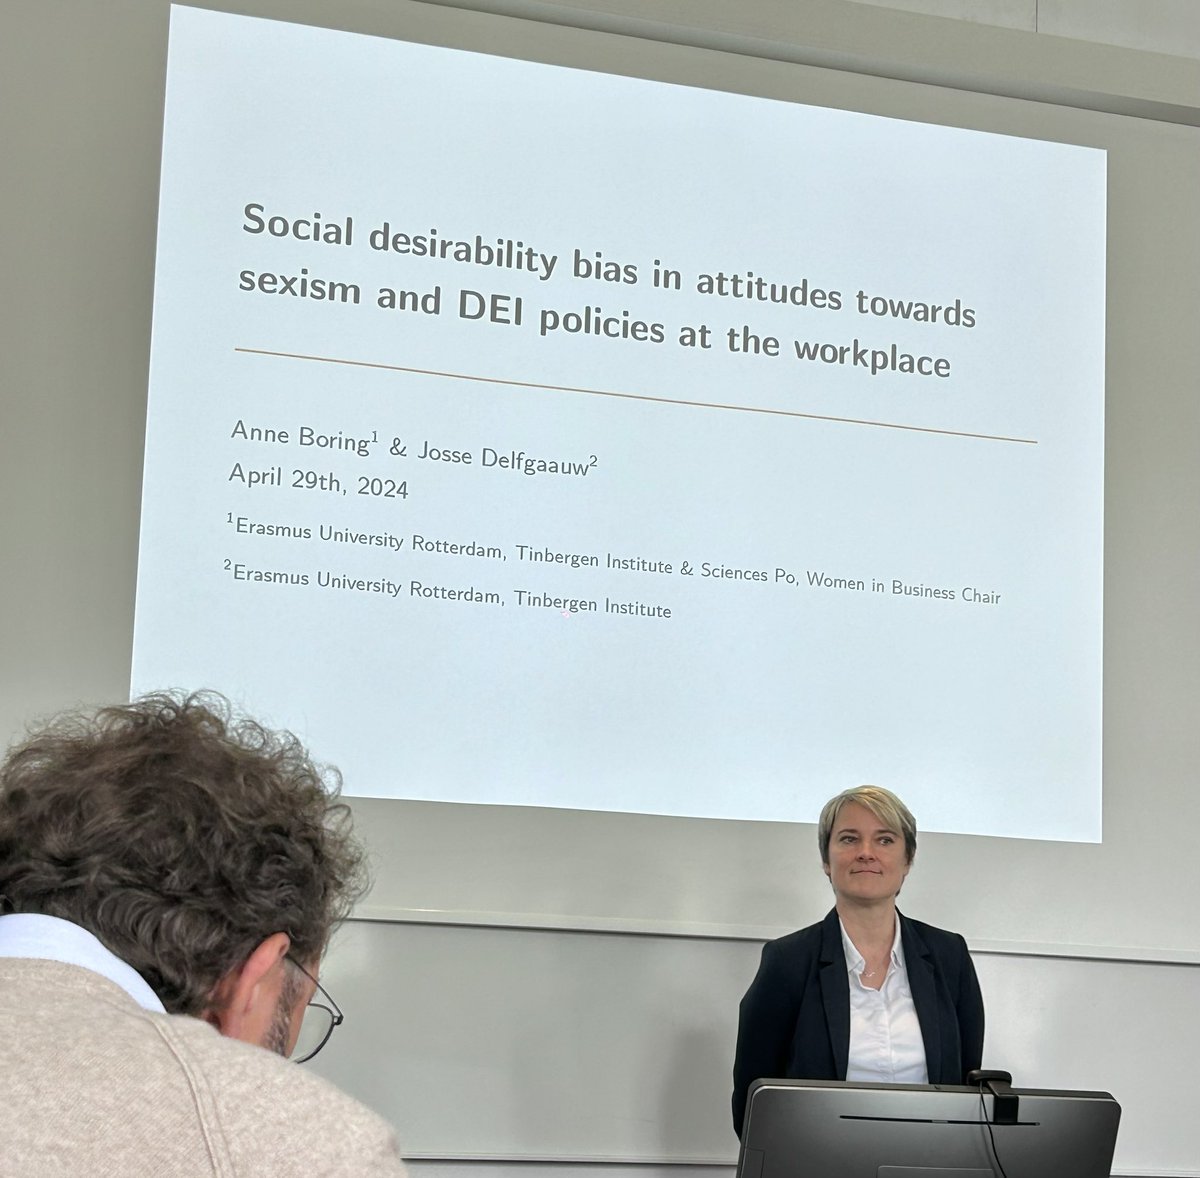 🔍Discussing today #SocialDesirability biases towards #sexism, #WorkplaceEquality and #DEI policies.
@anne_boring (@ErasmusESE, @ResearchTI & Head of Women in Business Chair @SciencesPo) presented her study on the topic co-authored with Josse Delfgaauw
#USIEcon #EconTwitter